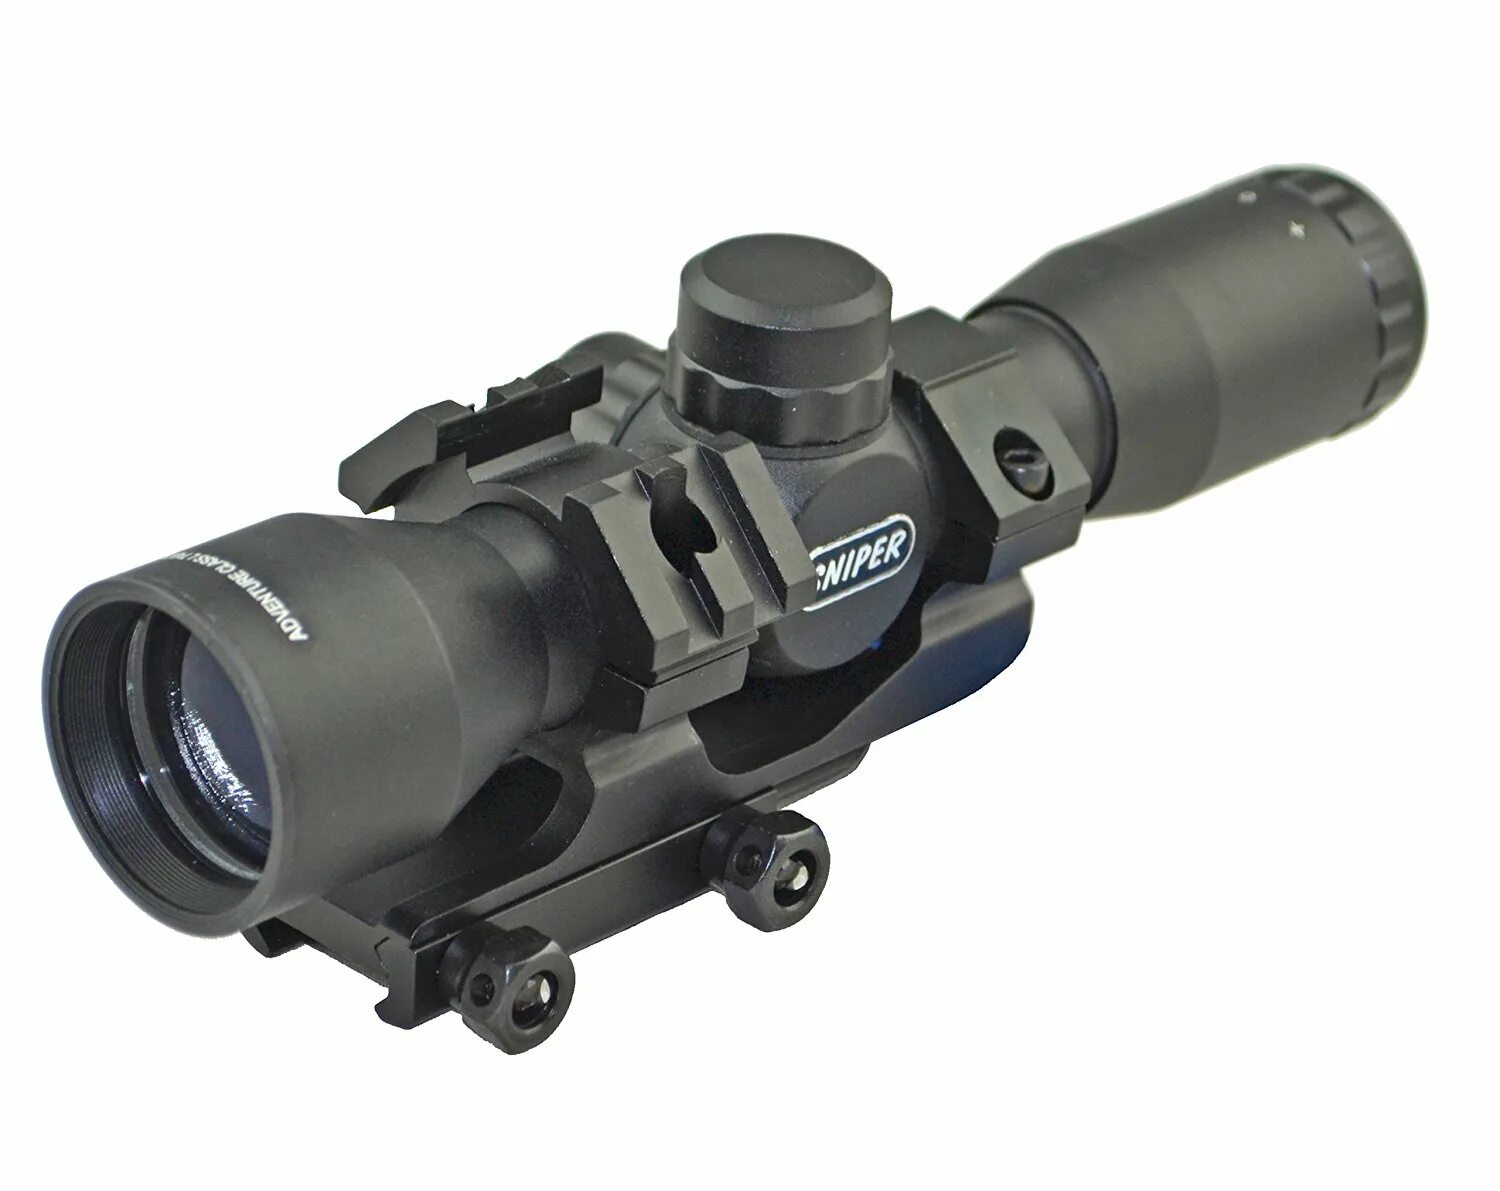 Scope 4. Riflescope 4x32 Compact. Generic 4x32 Compact. Compact scope. Scope with Rangefinder.